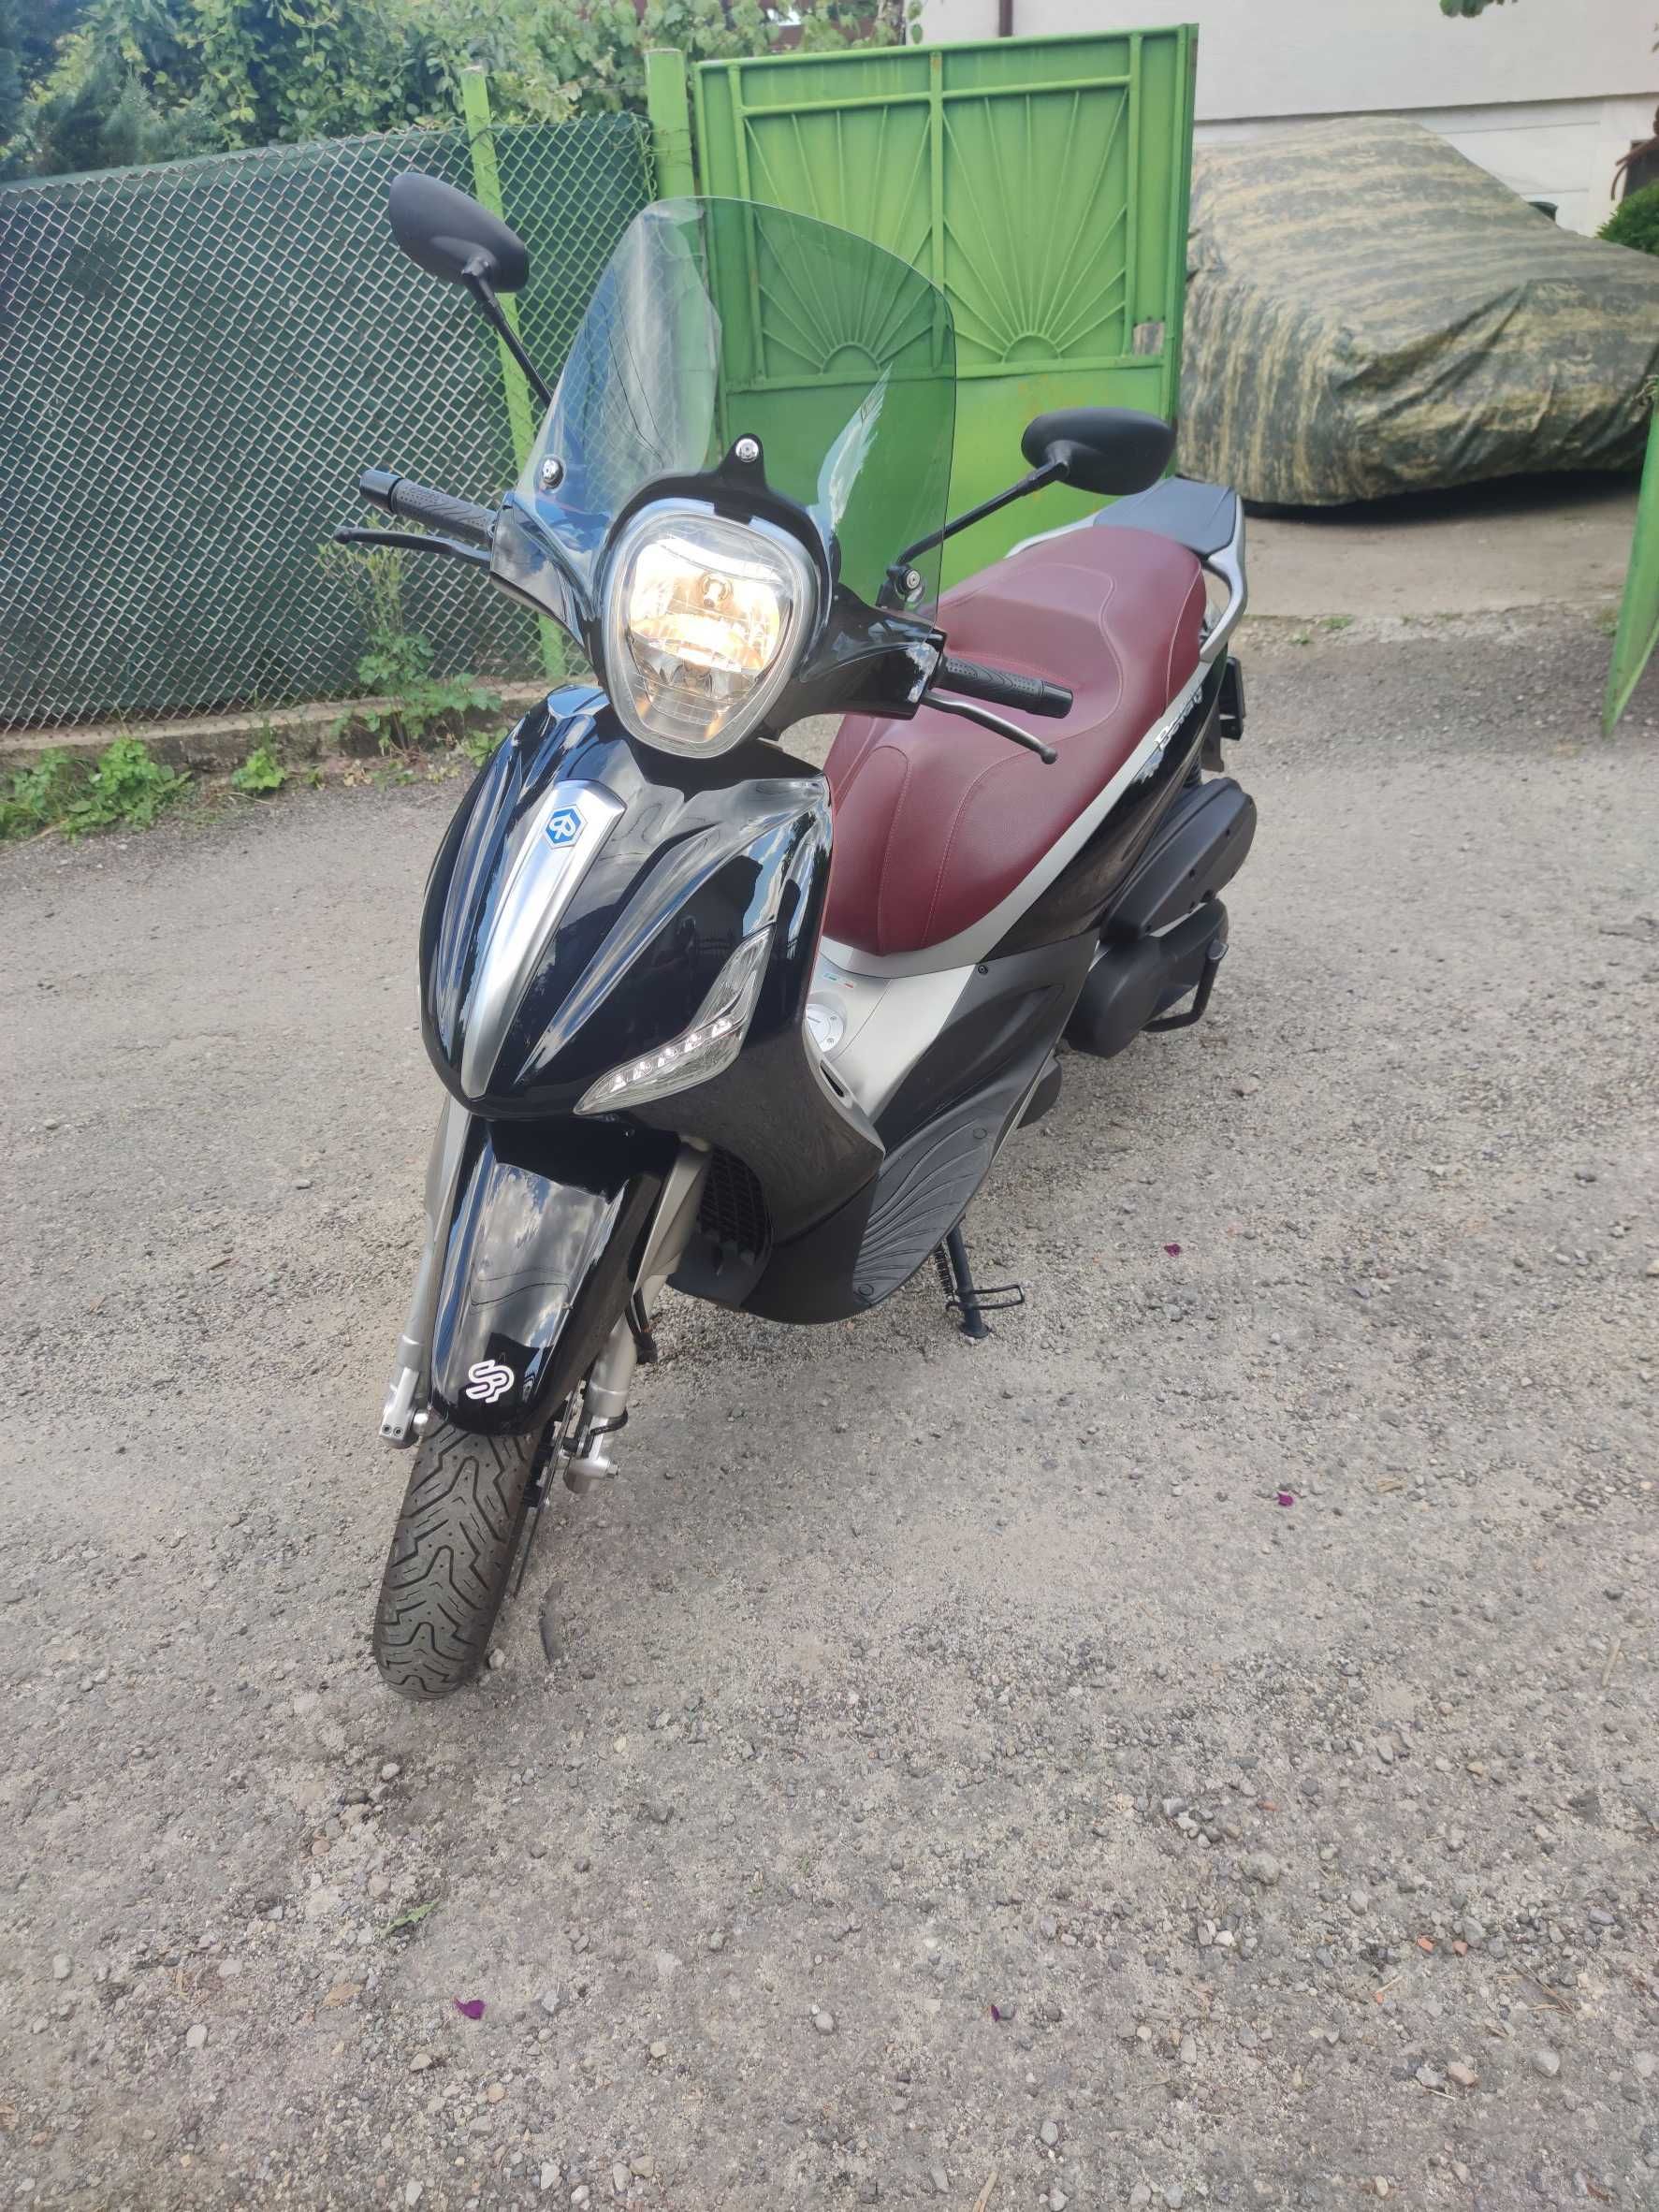 piaggio beverly 350i, 34hp, ABS